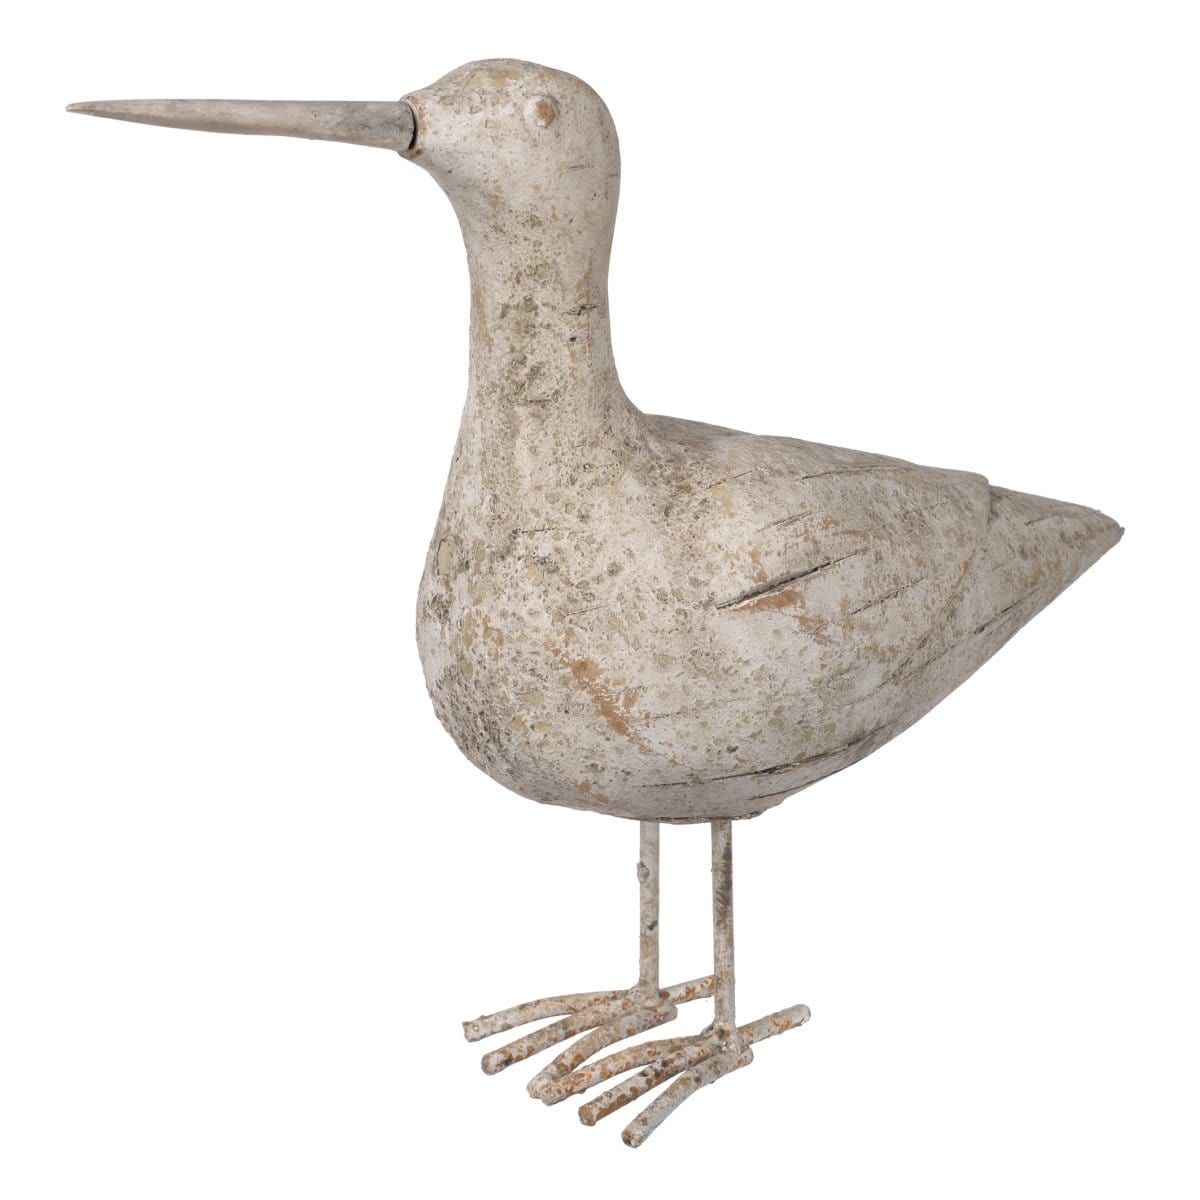 AB-1226 BRISA SEAGULL ACCENT picket and rail